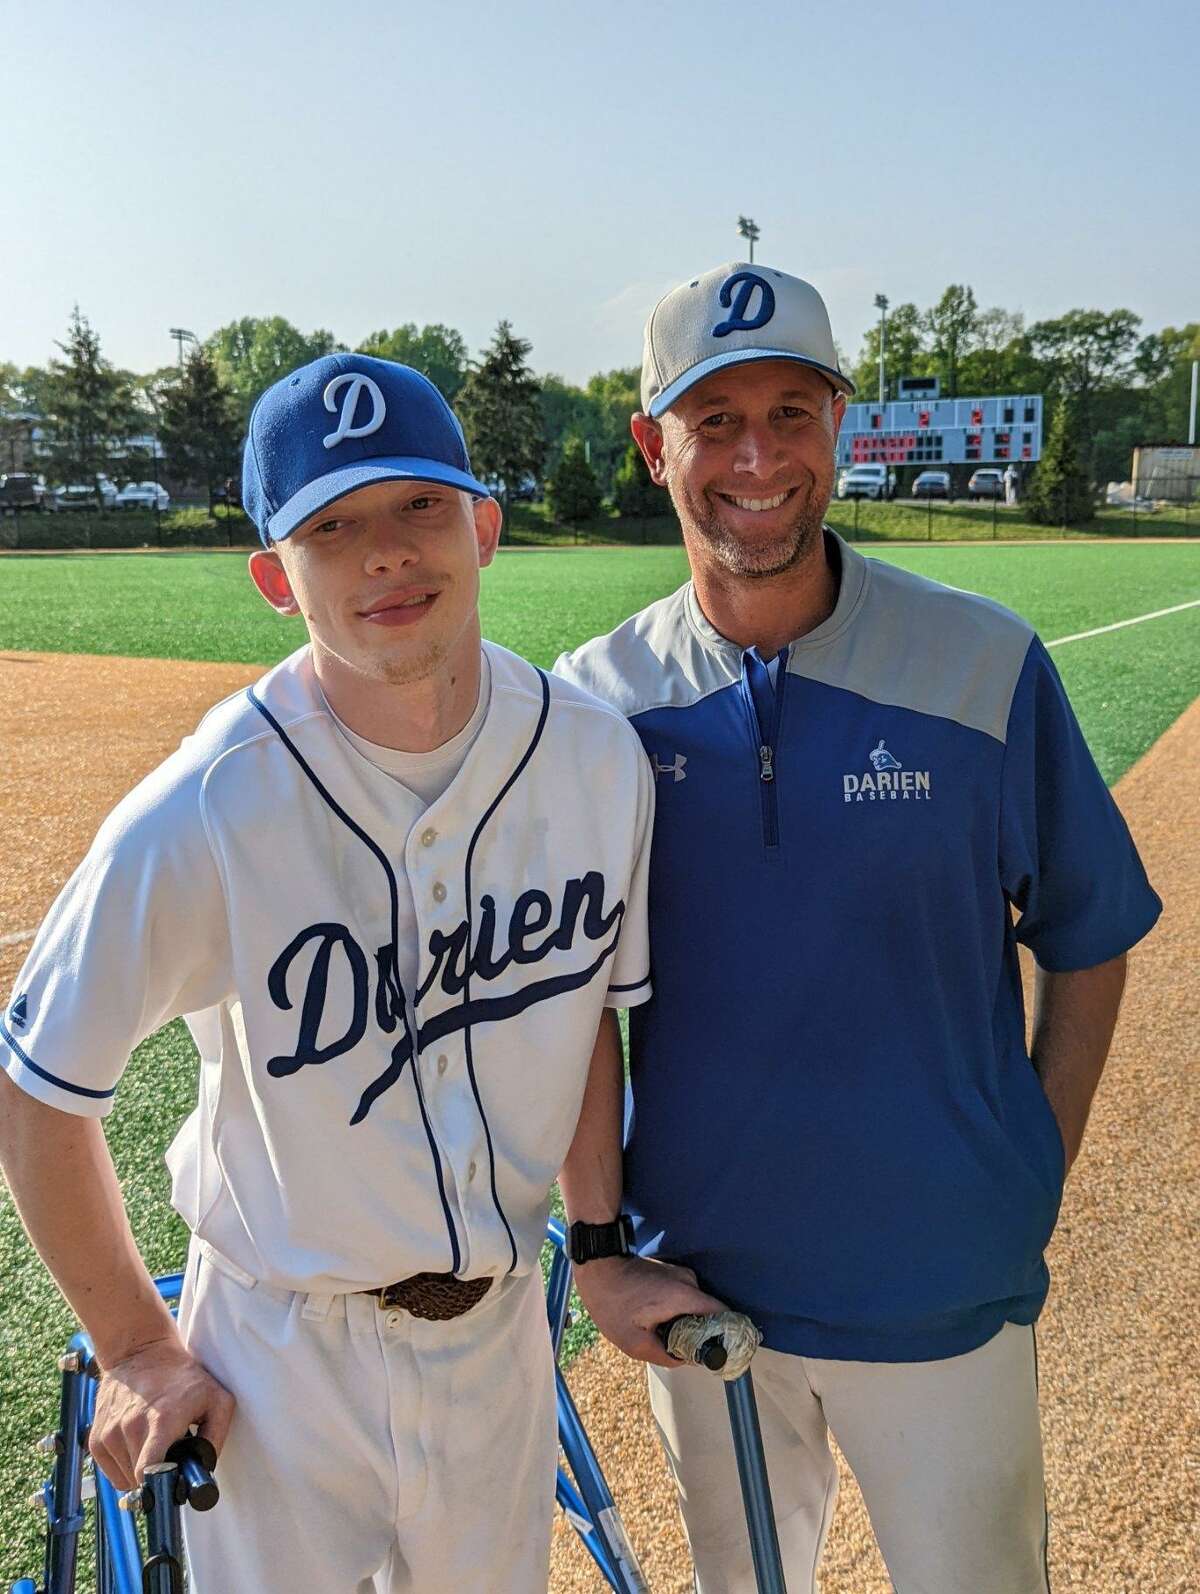 Darien senior Alex Baird, left, and baseball coach Mike Scott. Scott put senior team manager Baird, who has cerebral palsy, into the last game of the season for a stint on the mound.